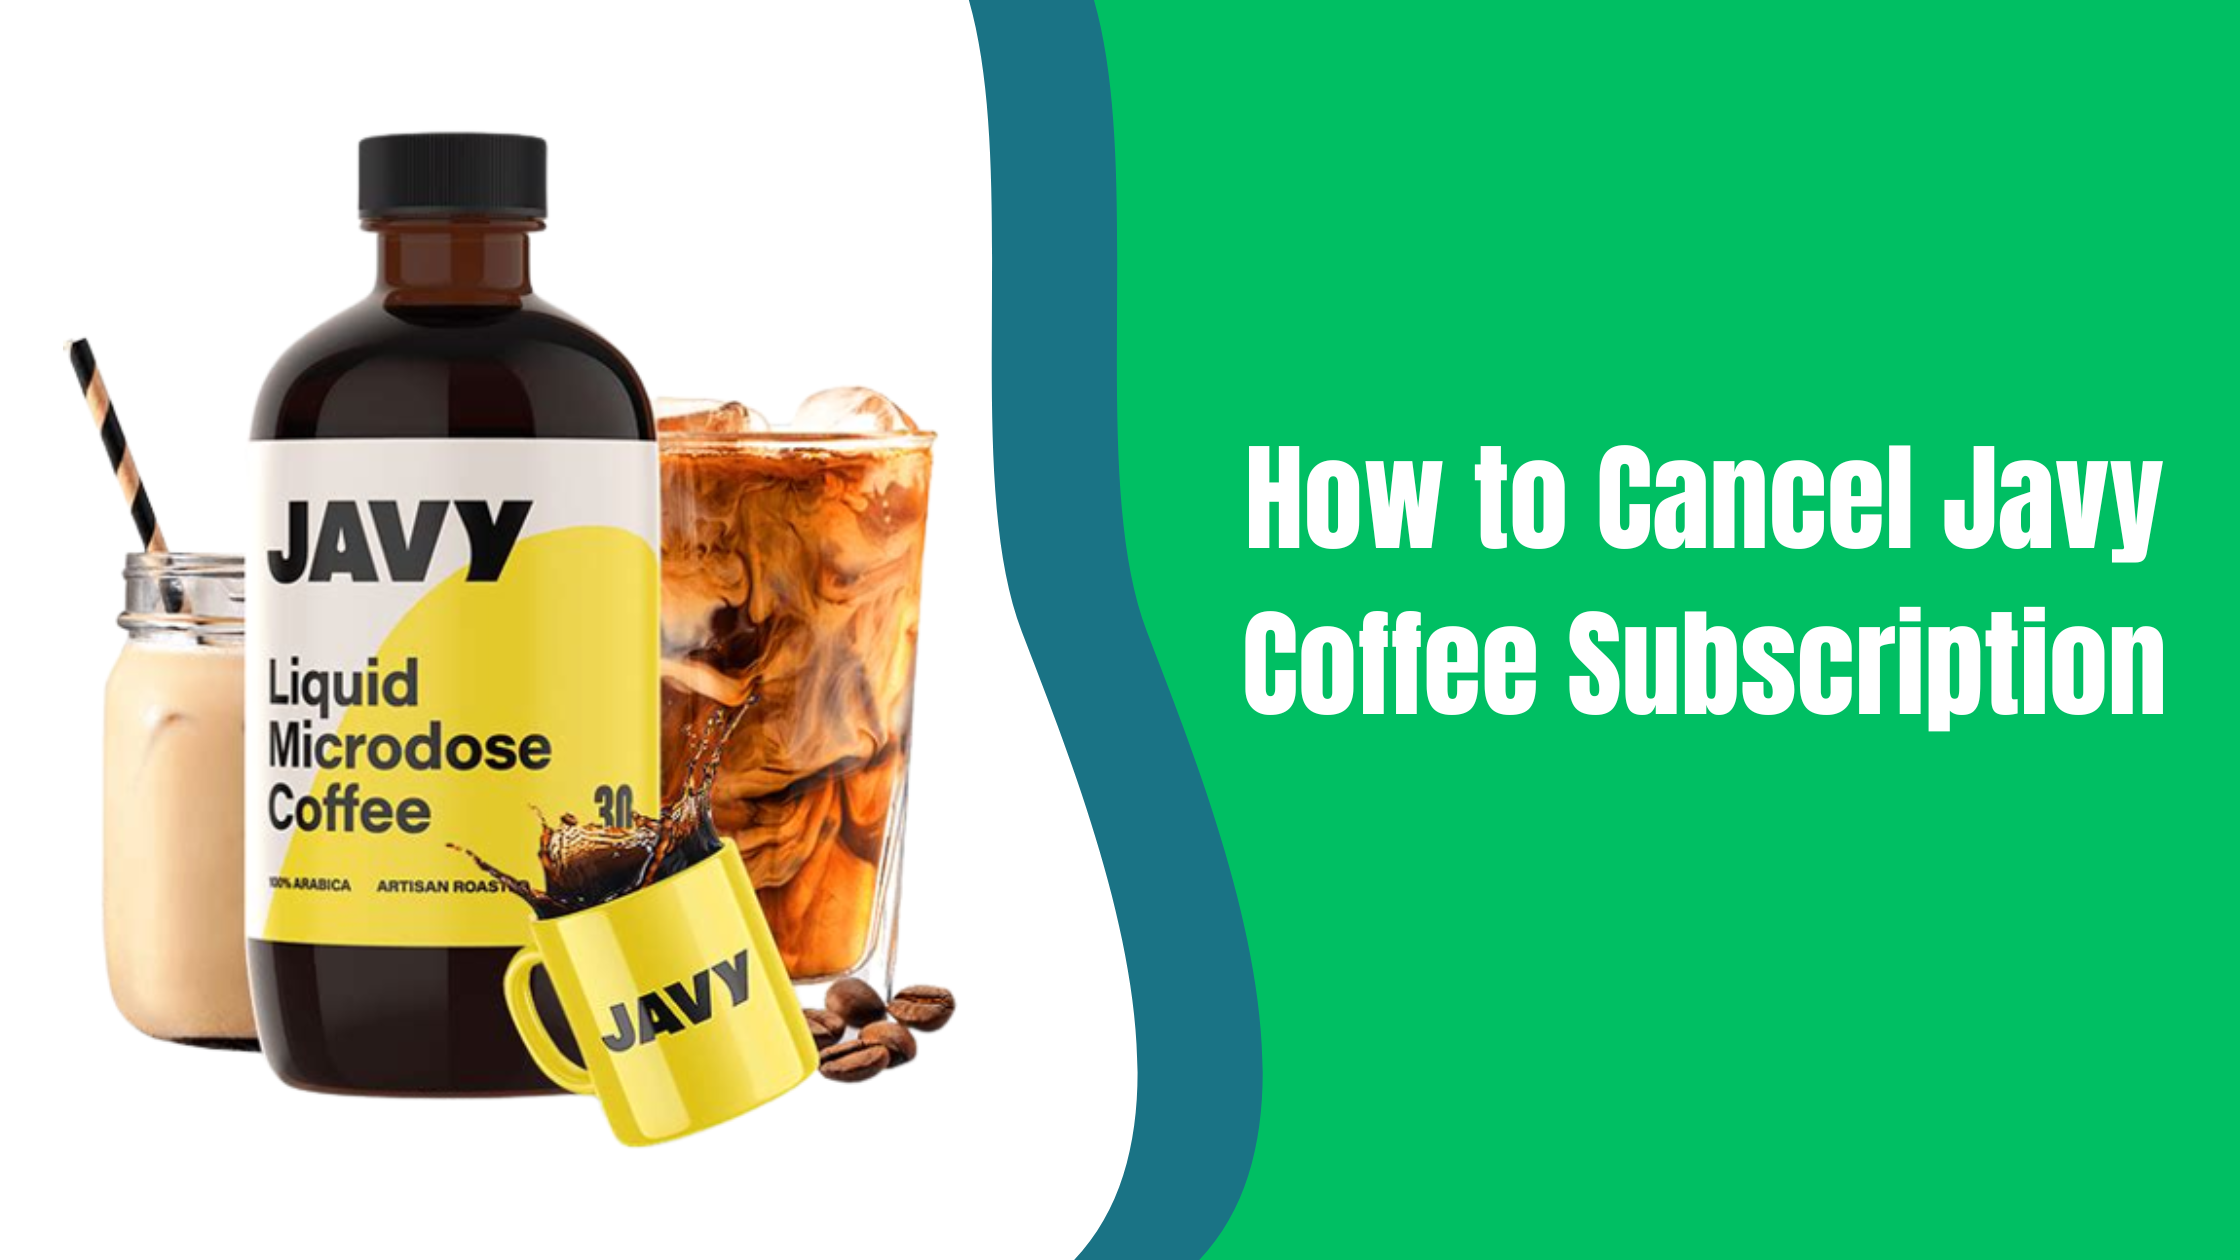 How to Cancel Javy Coffee Subscription